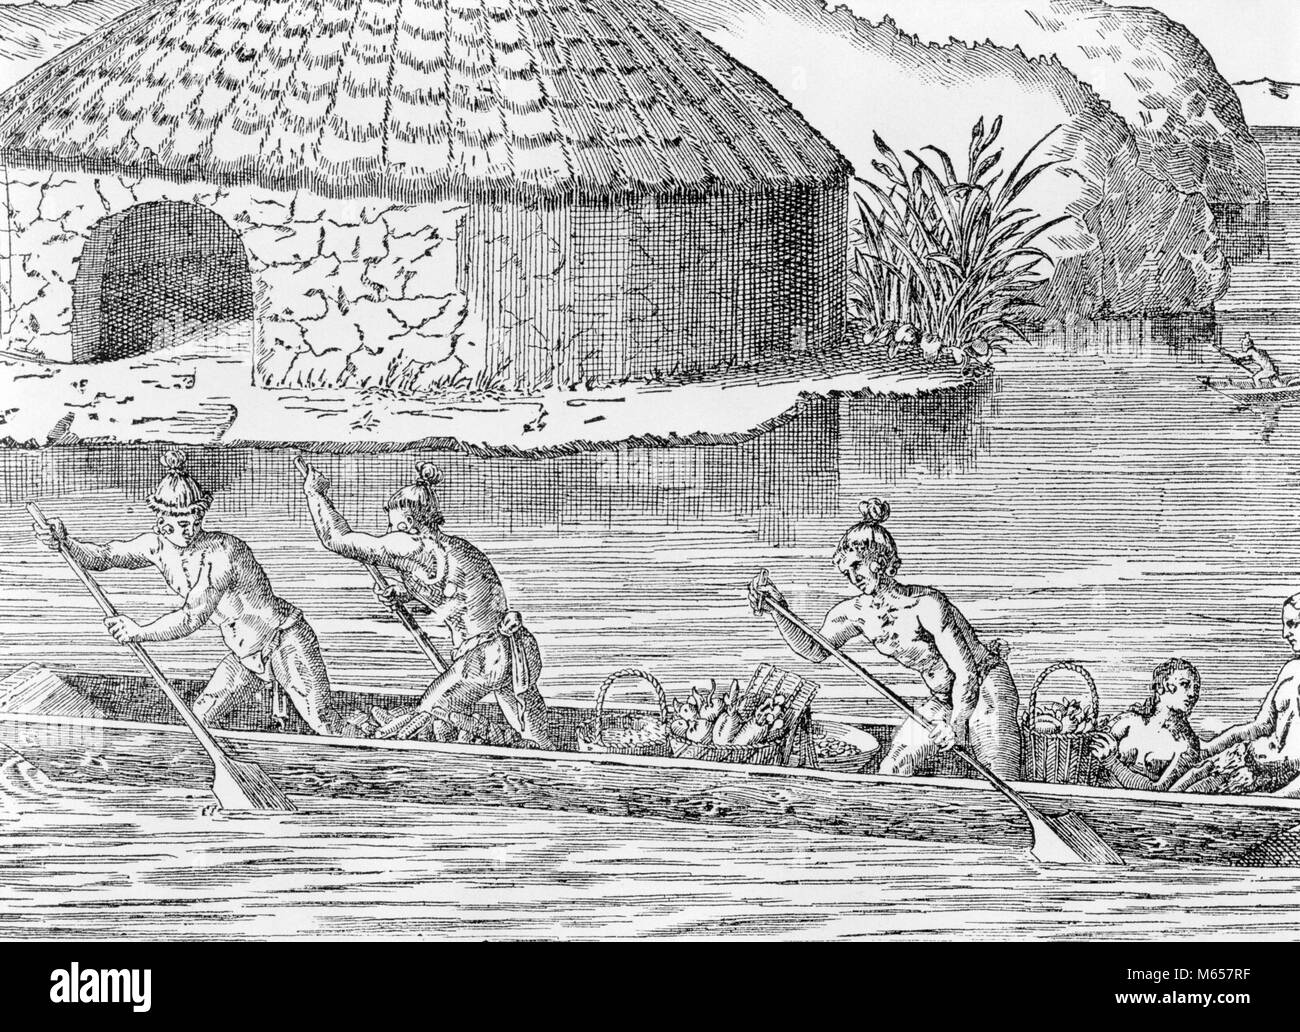 1500s 1600s ENGRAVING DEPICTING EARLY NATIVE AMERICAN INDIAN LIFE MEN PADDLING DUGOUT CANOE ON RIVER BY VILLAGE IN FLORIDA - i6010 LAN001 HARS ENGRAVING TRANSPORTATION NOSTALGIA NORTH AMERICA TOGETHERNESS HISTORIC NORTH AMERICAN EARLY PROPERTY STRENGTH EXTERIOR PROGRESS PEOPLES TRANSPORTING REAL ESTATE PADDLES COOPERATION STRUCTURES EDIFICE NATIVE AMERICAN SMALL GROUP OF PEOPLE 1600s DUGOUT MALES PADDLING PRIMITIVE 1500s B&W BLACK AND WHITE DEPICTING INDIGENOUS OLD FASHIONED PERSONS THE AMERICAS Stock Photo